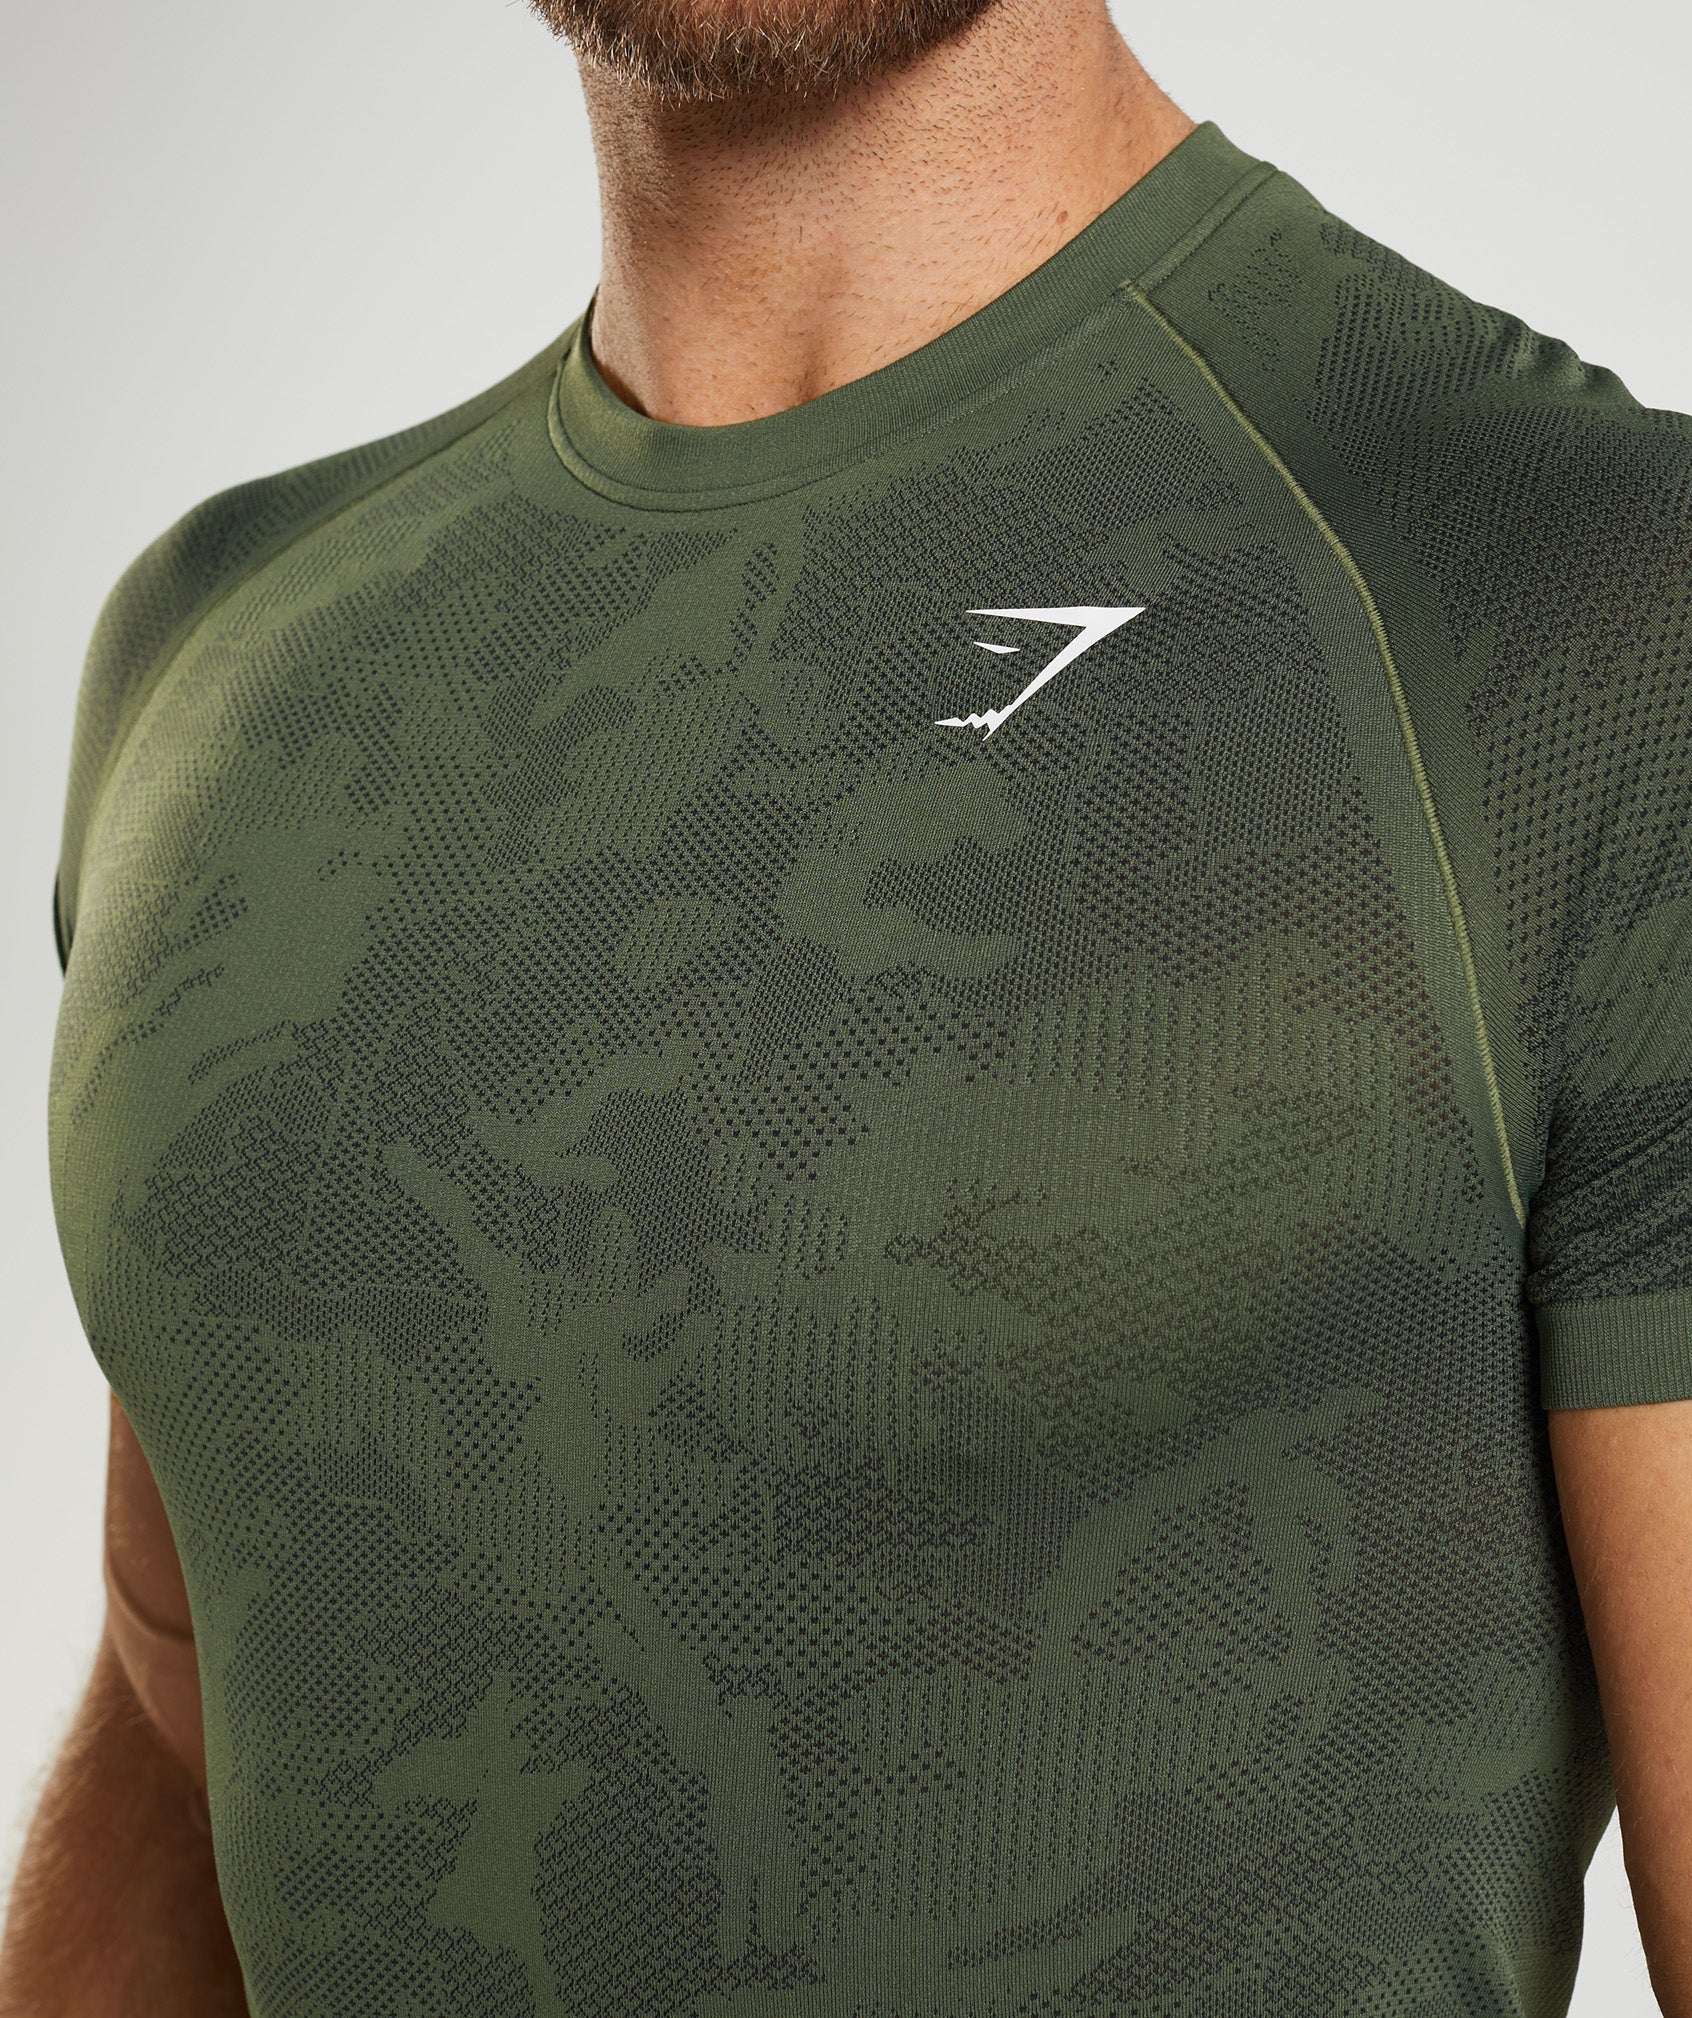 Geo Seamless T-Shirt in Core Olive/Black - view 5